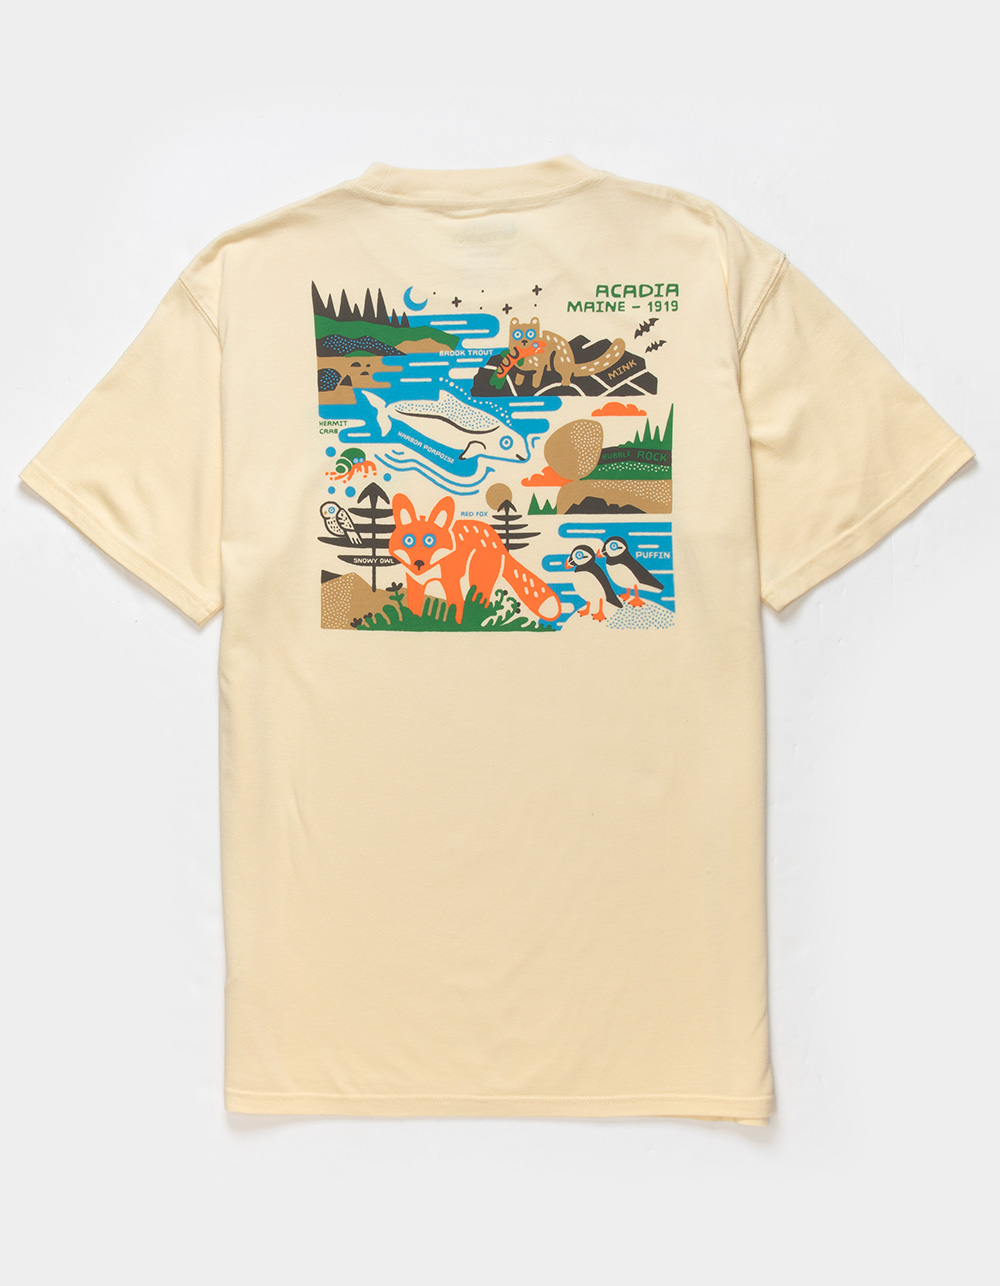 PARKS PROJECT Arcadia 1919 Mens Tee - NATURAL | Tillys